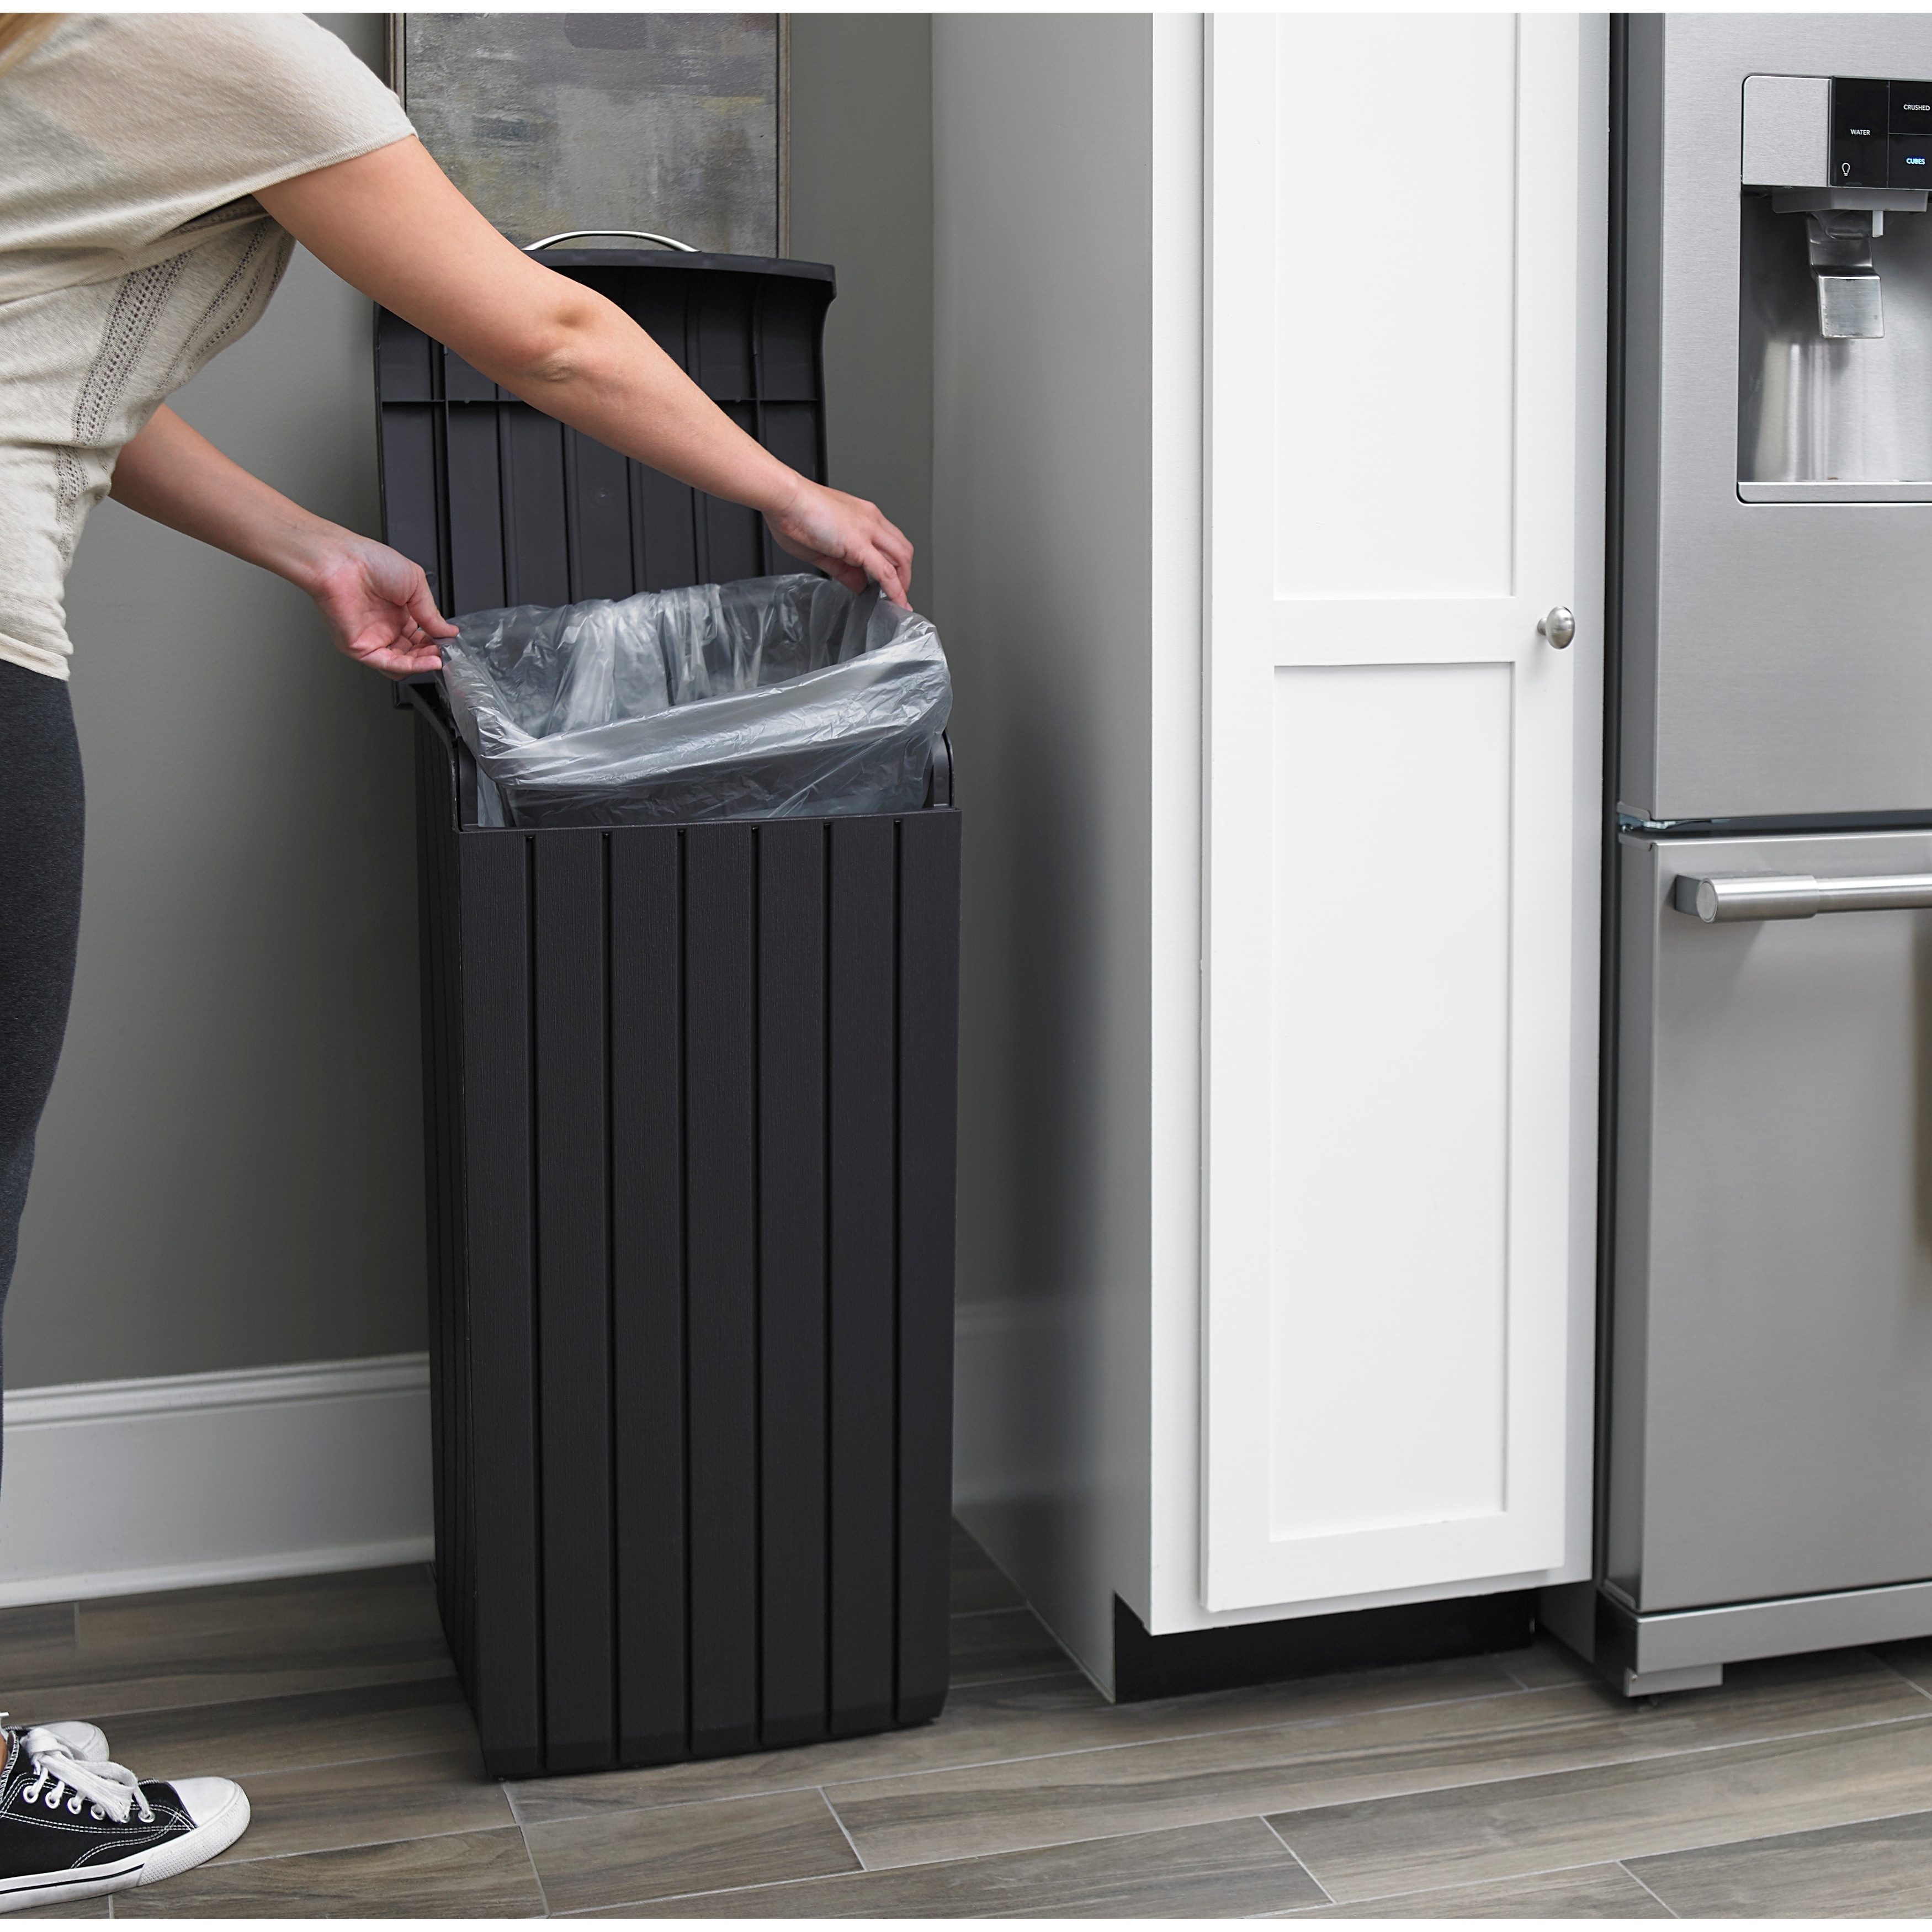 https://ak1.ostkcdn.com/images/products/30780300/Keter-Copenhagen-32-Gallon-Indoor-Outdoor-Trashcan-with-Lid-a282df96-ab39-49bb-a221-38e10b1cf3ce.jpg